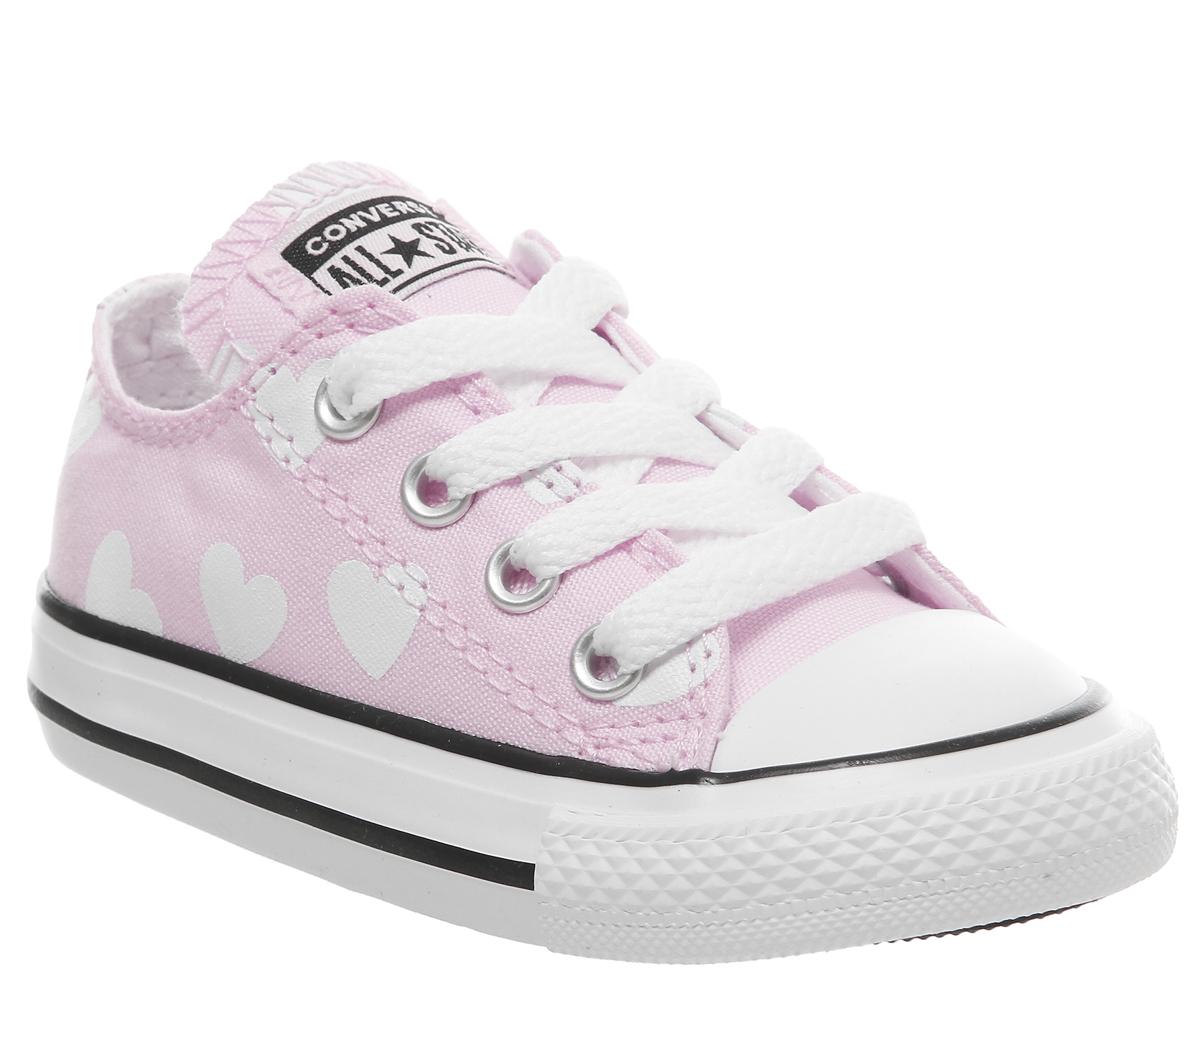 infant converse trainers, OFF 79%,Buy!